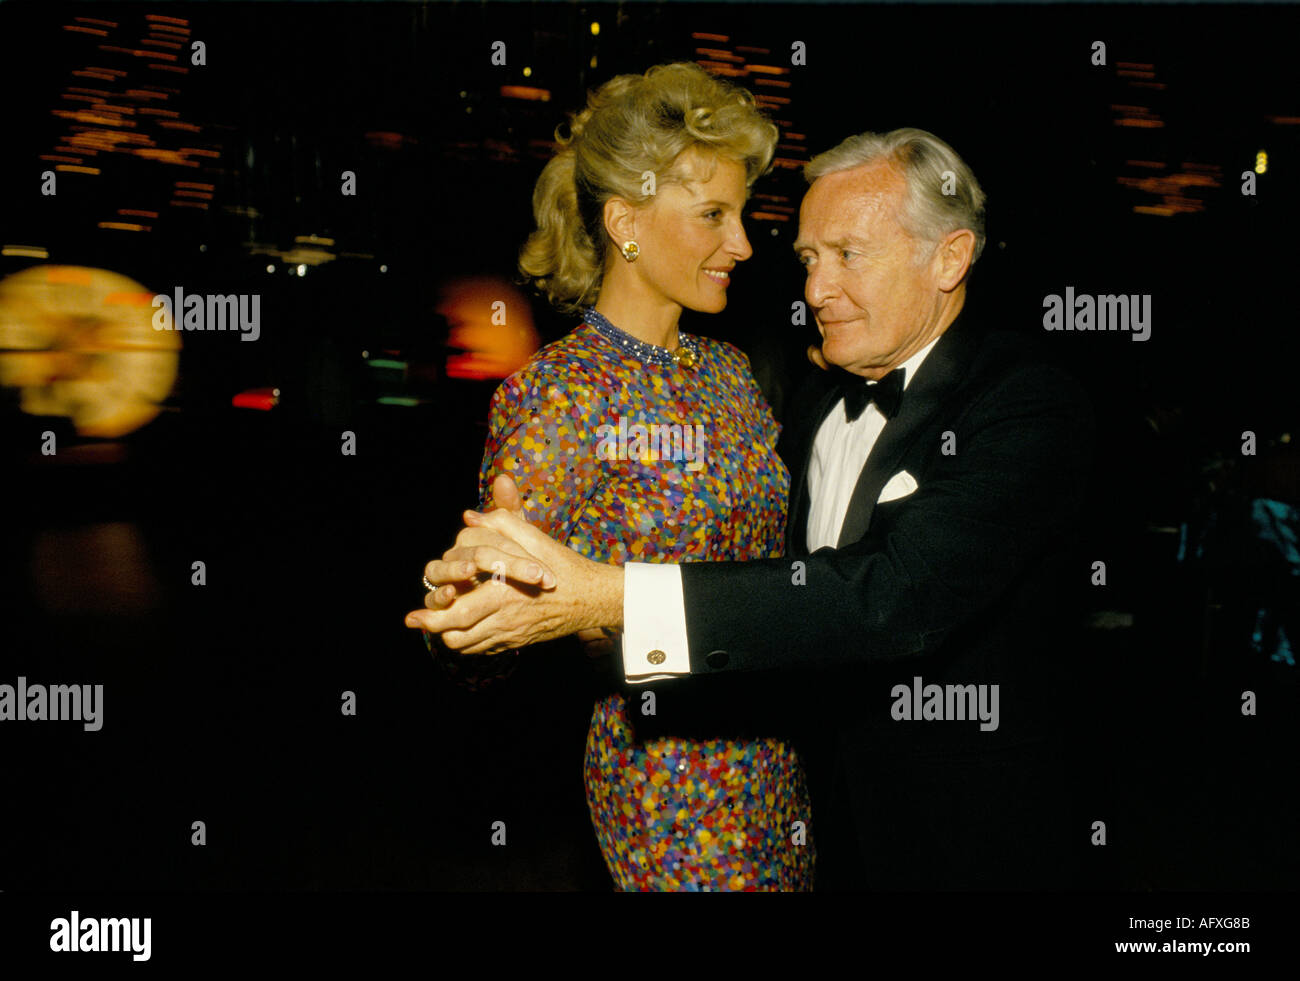 Princess Michael of Kent dancing with guest at party in Hilton Hotel London Circa 1985. Charity event Stock Photo